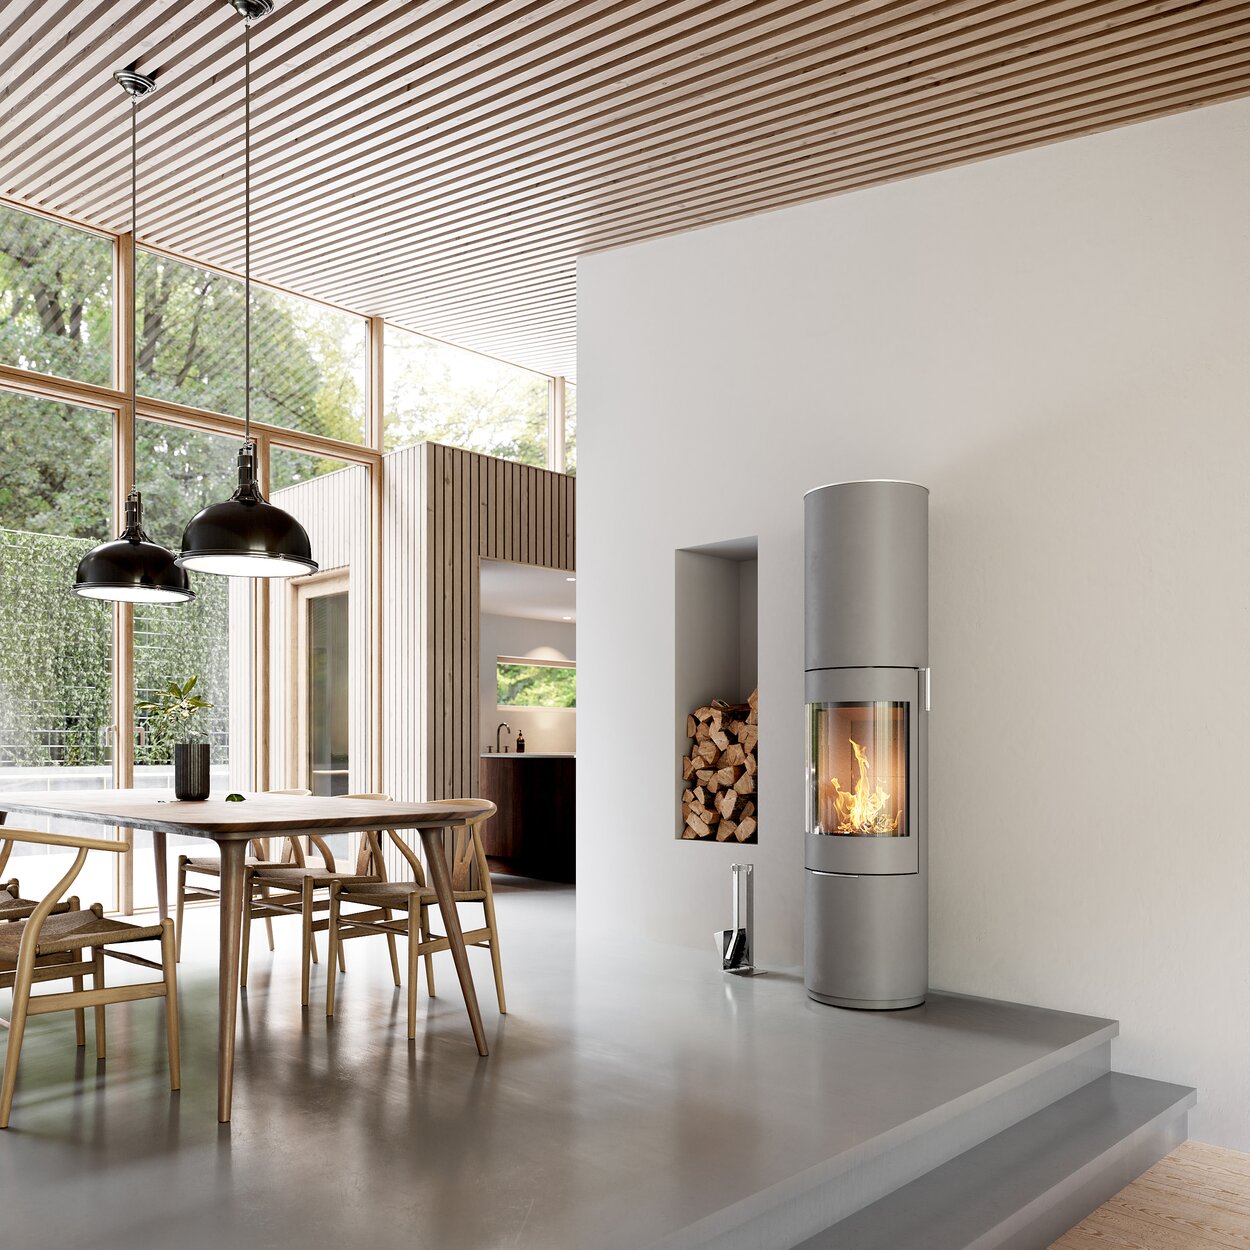 Wood stove PILAR in nickel with steel door and stainless steel handle in the dining room with modern furnishing style